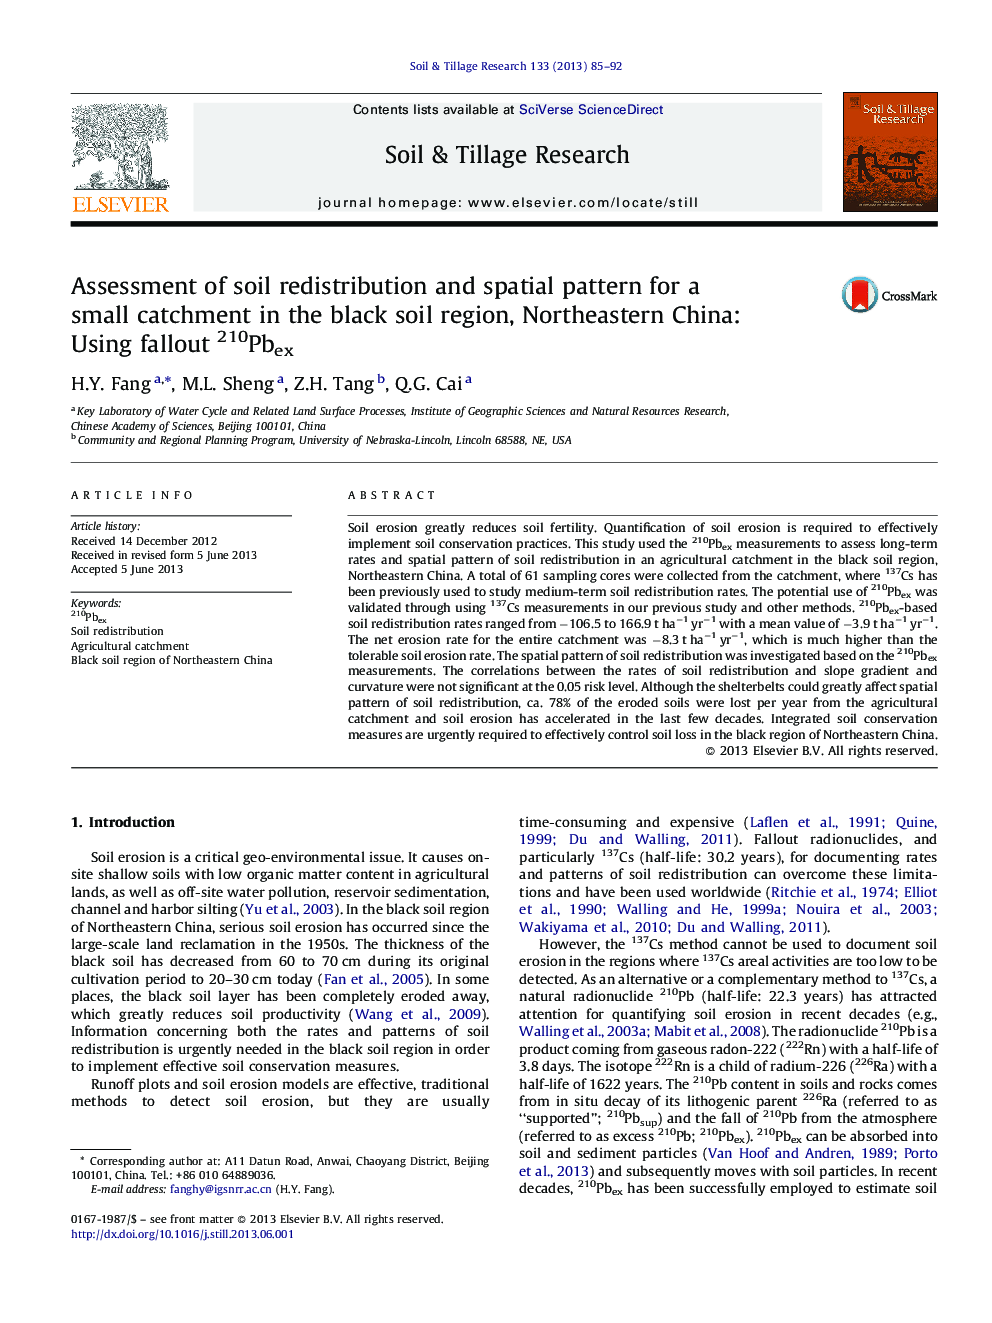 Assessment of soil redistribution and spatial pattern for a small catchment in the black soil region, Northeastern China: Using fallout 210Pbex